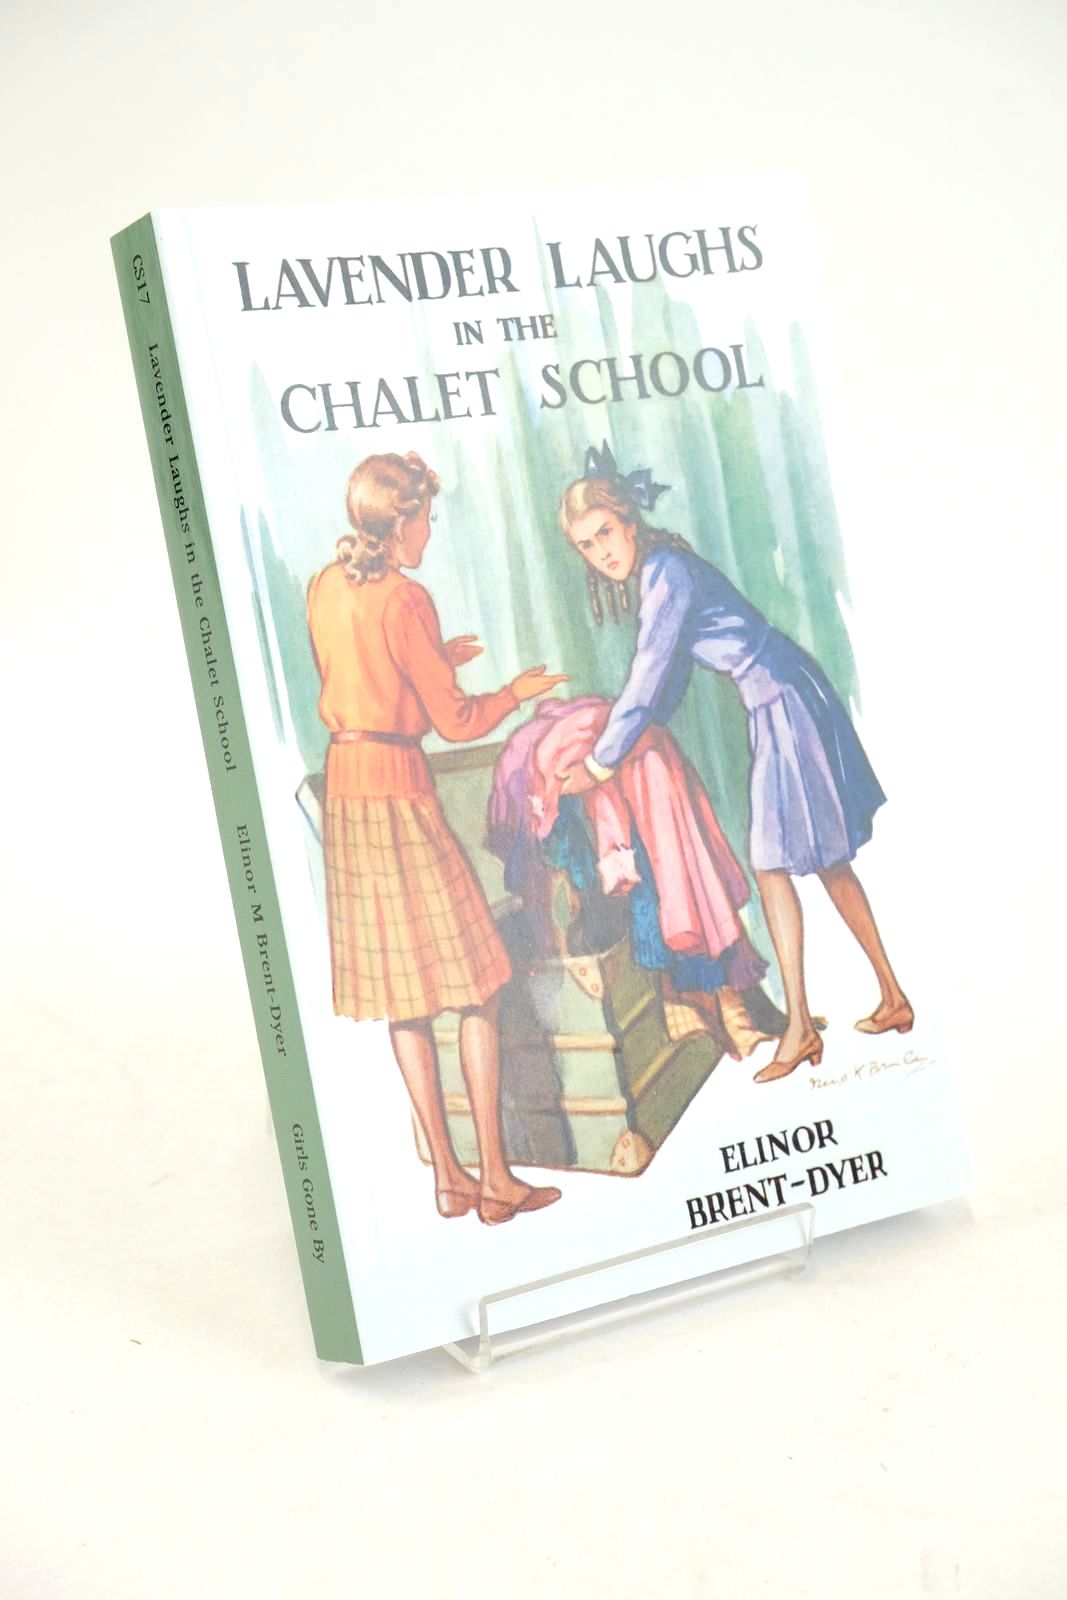 Photo of LAVENDER LAUGHS IN THE CHALET SCHOOL written by Brent-Dyer, Elinor M. published by Girls Gone By (STOCK CODE: 1325491)  for sale by Stella & Rose's Books